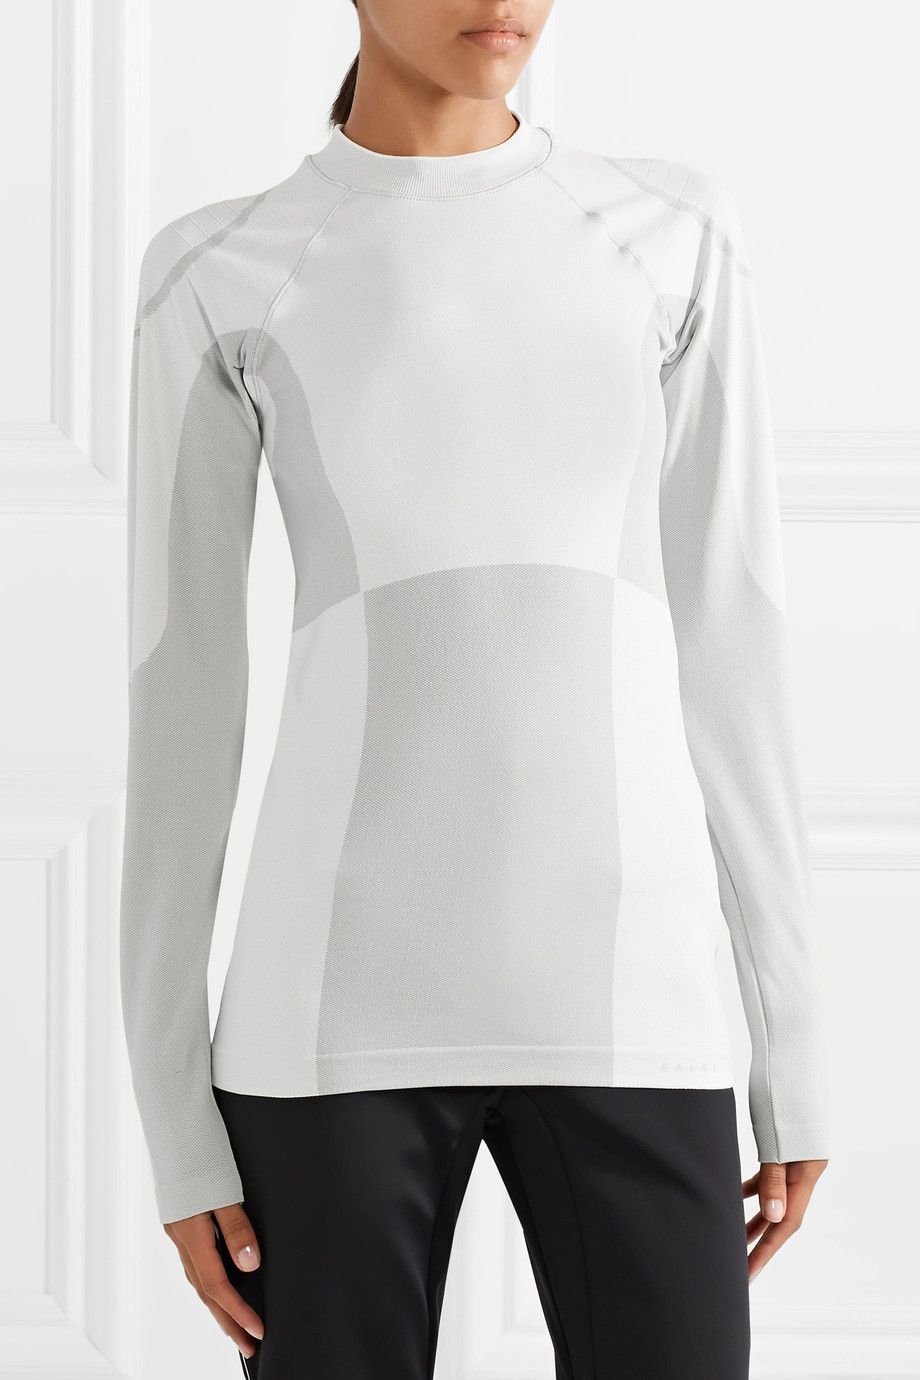 Clothing, White, Long-sleeved t-shirt, Sleeve, Neck, Shoulder, T-shirt, Top, Outerwear, Joint, 